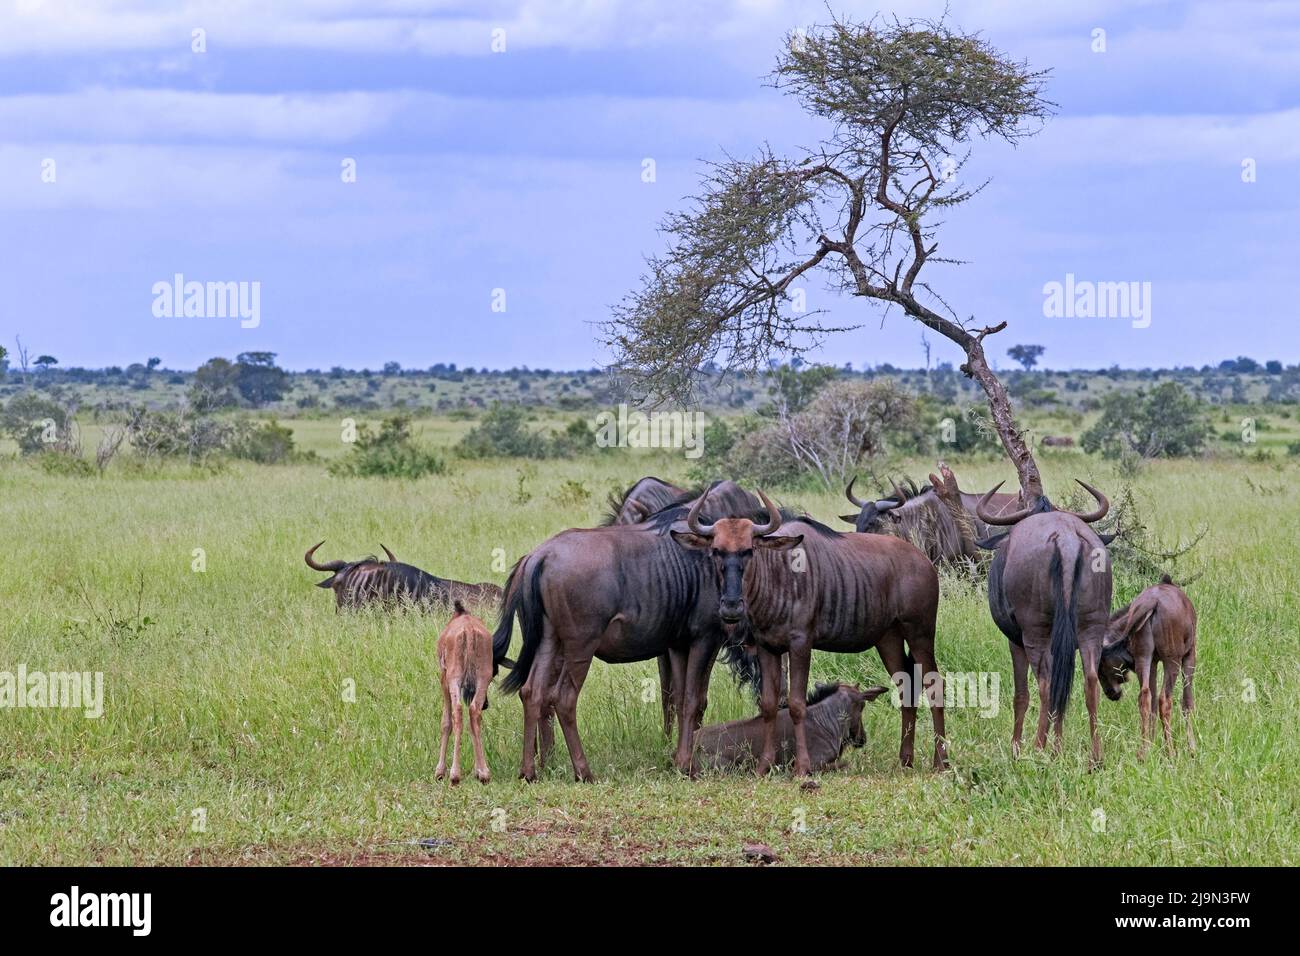 Blue wildebeest / common wildebeest (Connochaetes taurinus) herd on the savanna in the Kruger National Park, Mpumalanga, South Africa Stock Photo